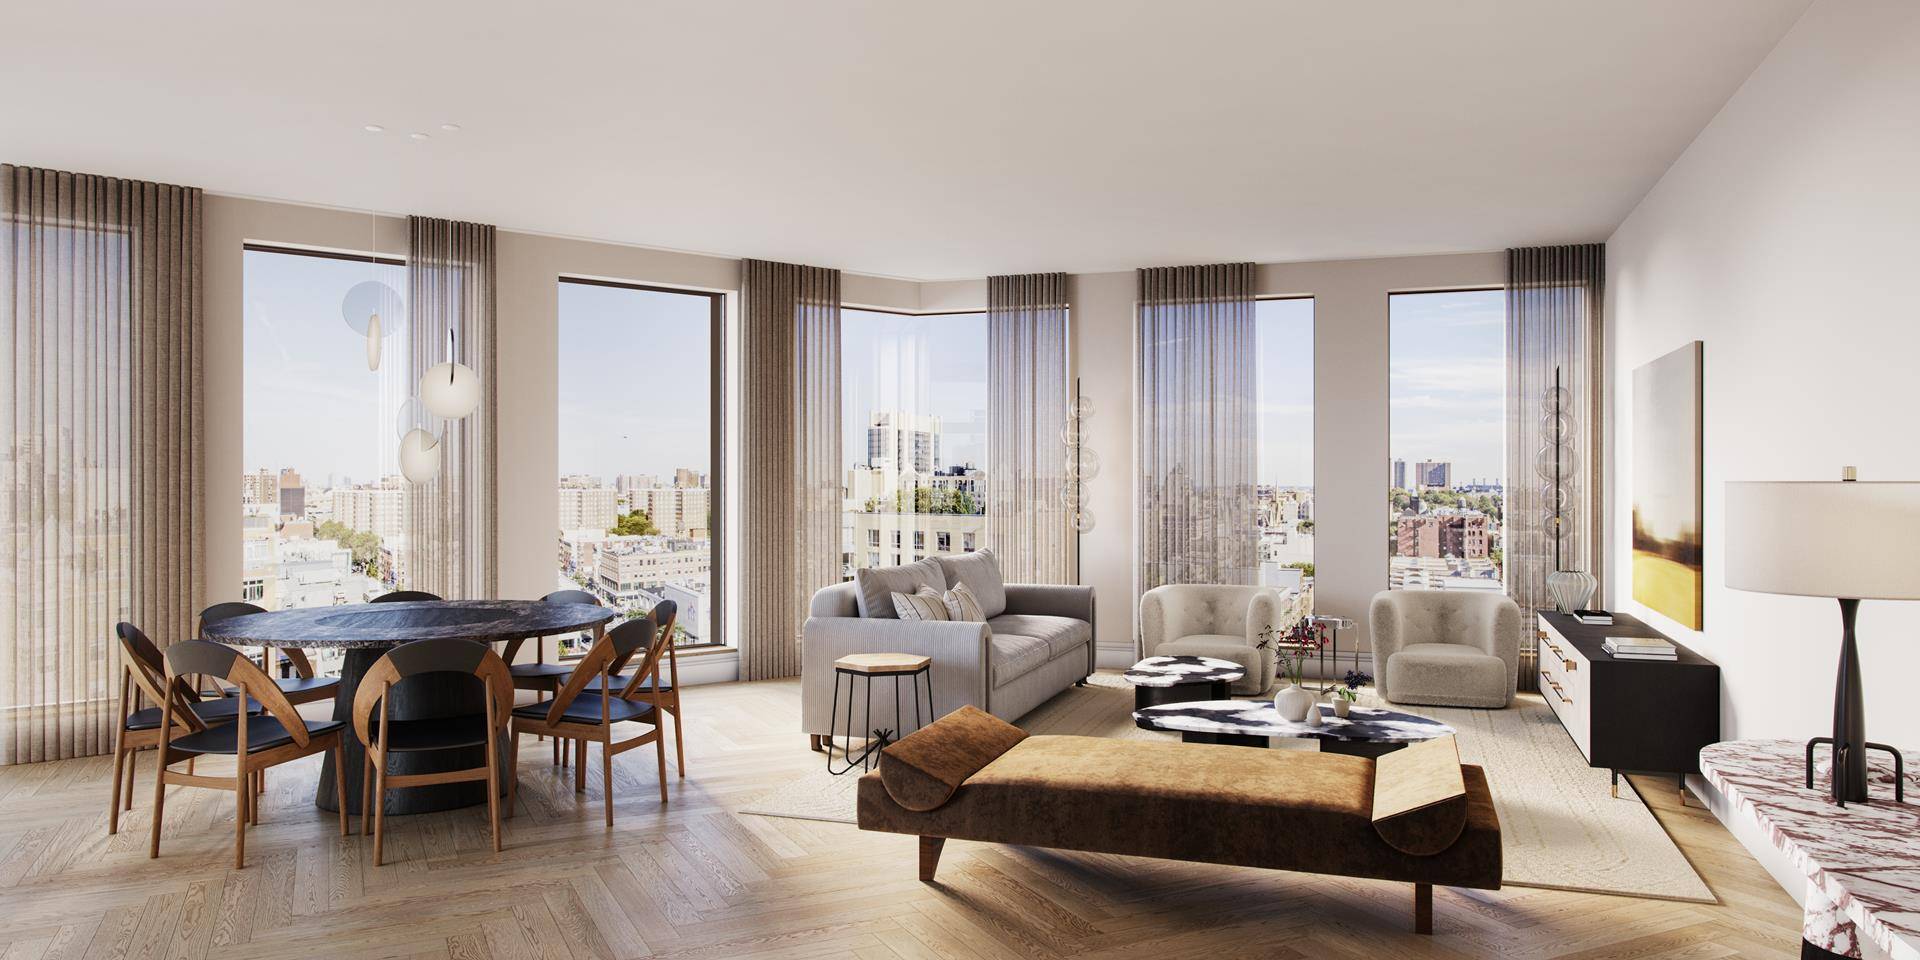 Sales Gallery Now Open By Appointment Introducing residence 4B at 300 West, a 1, 000 square foot eastern facing two bedroom, two bathroom, offering an enormous living and dining area ...